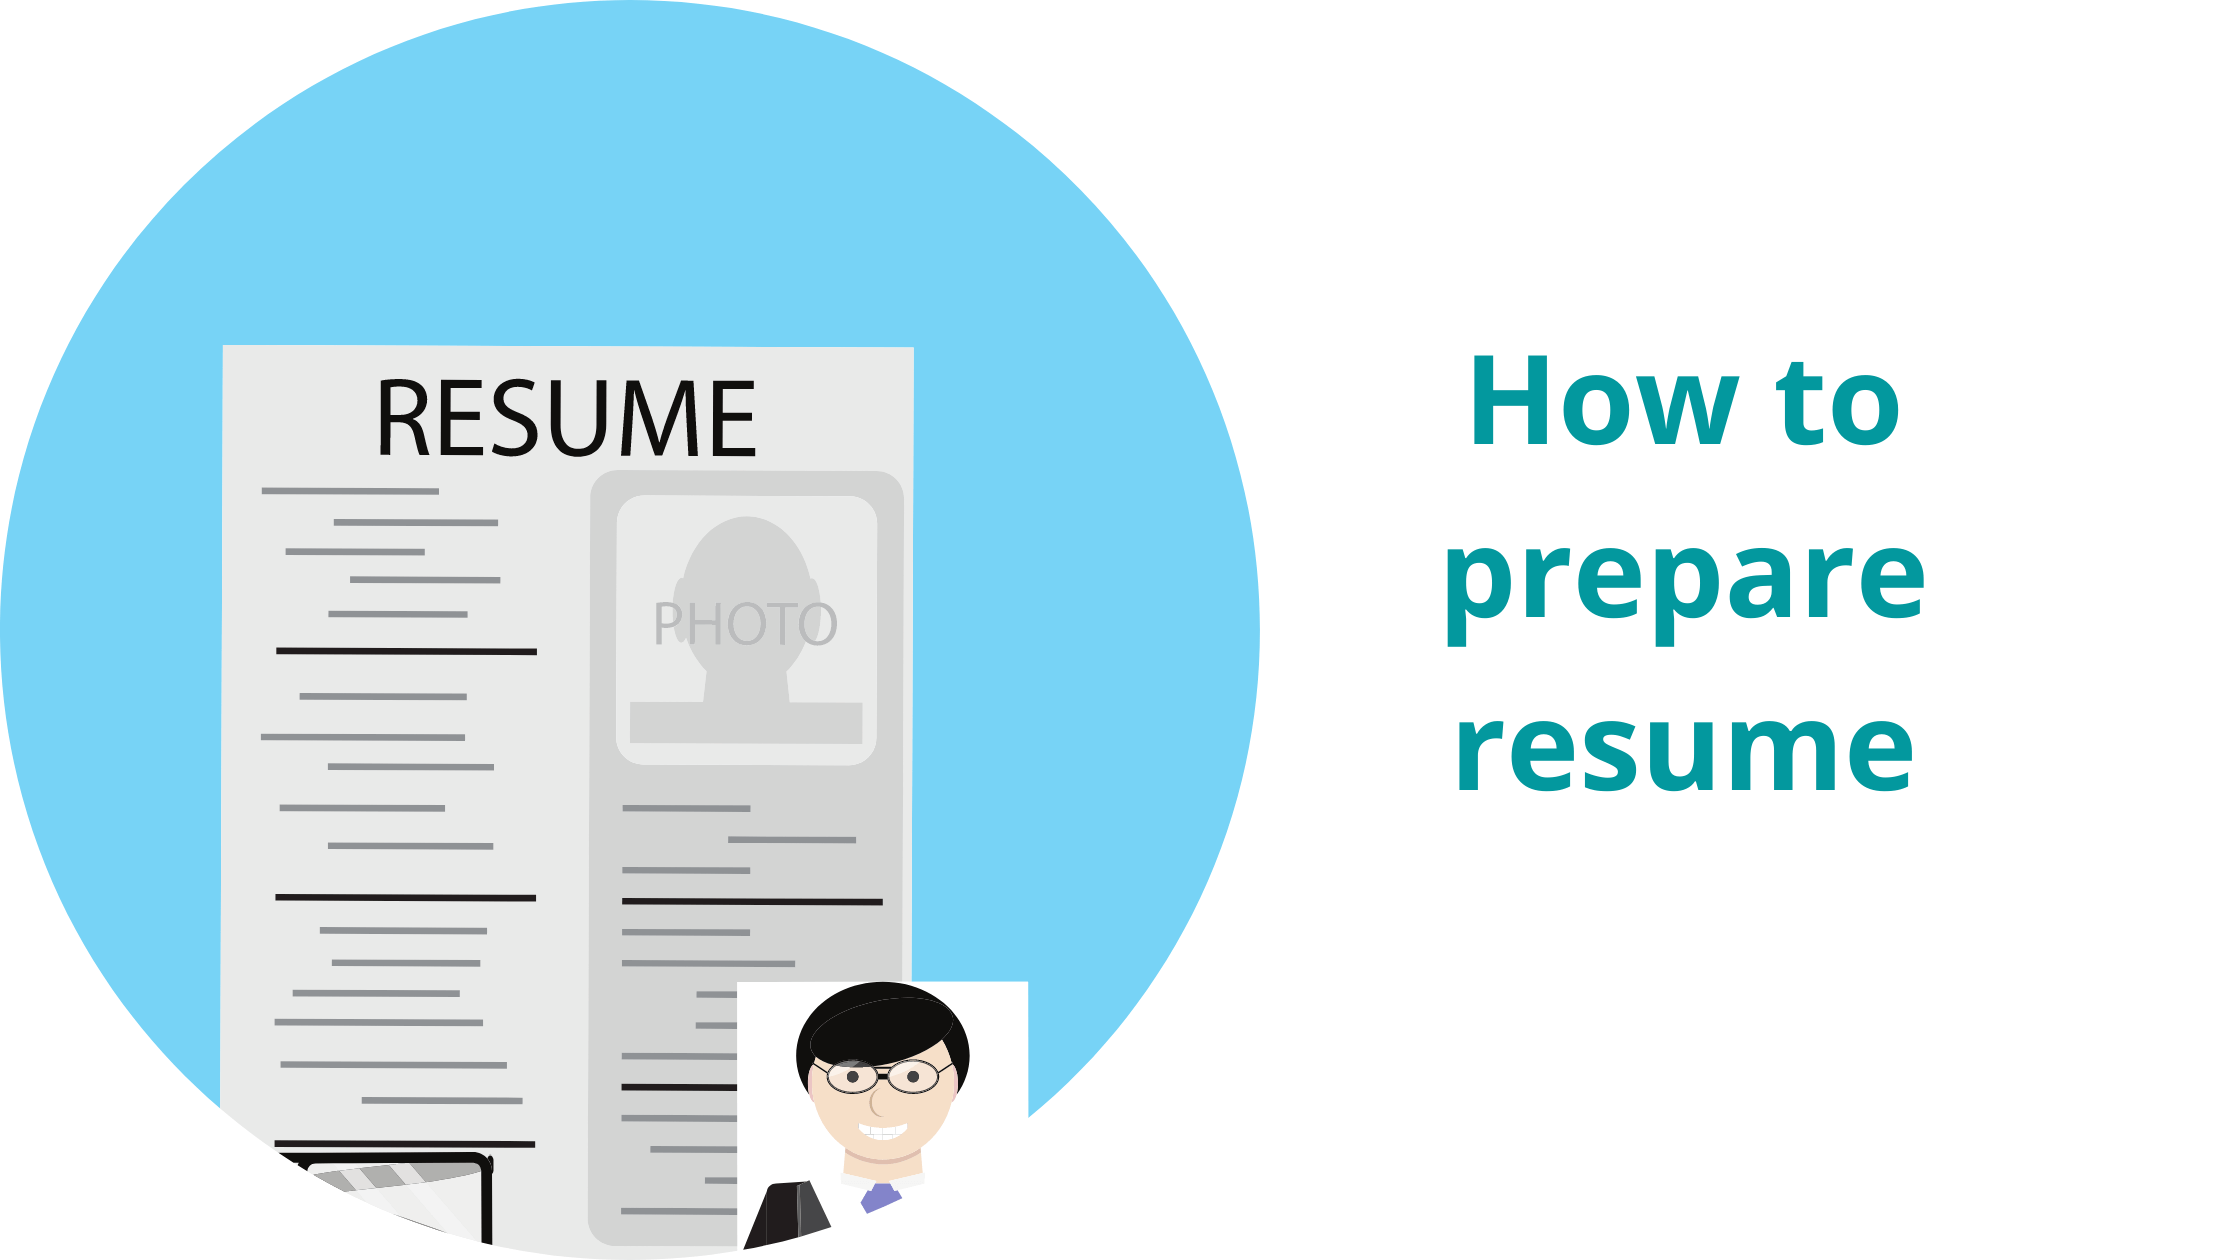 How to prepare a resume – tips for freshers and experienced